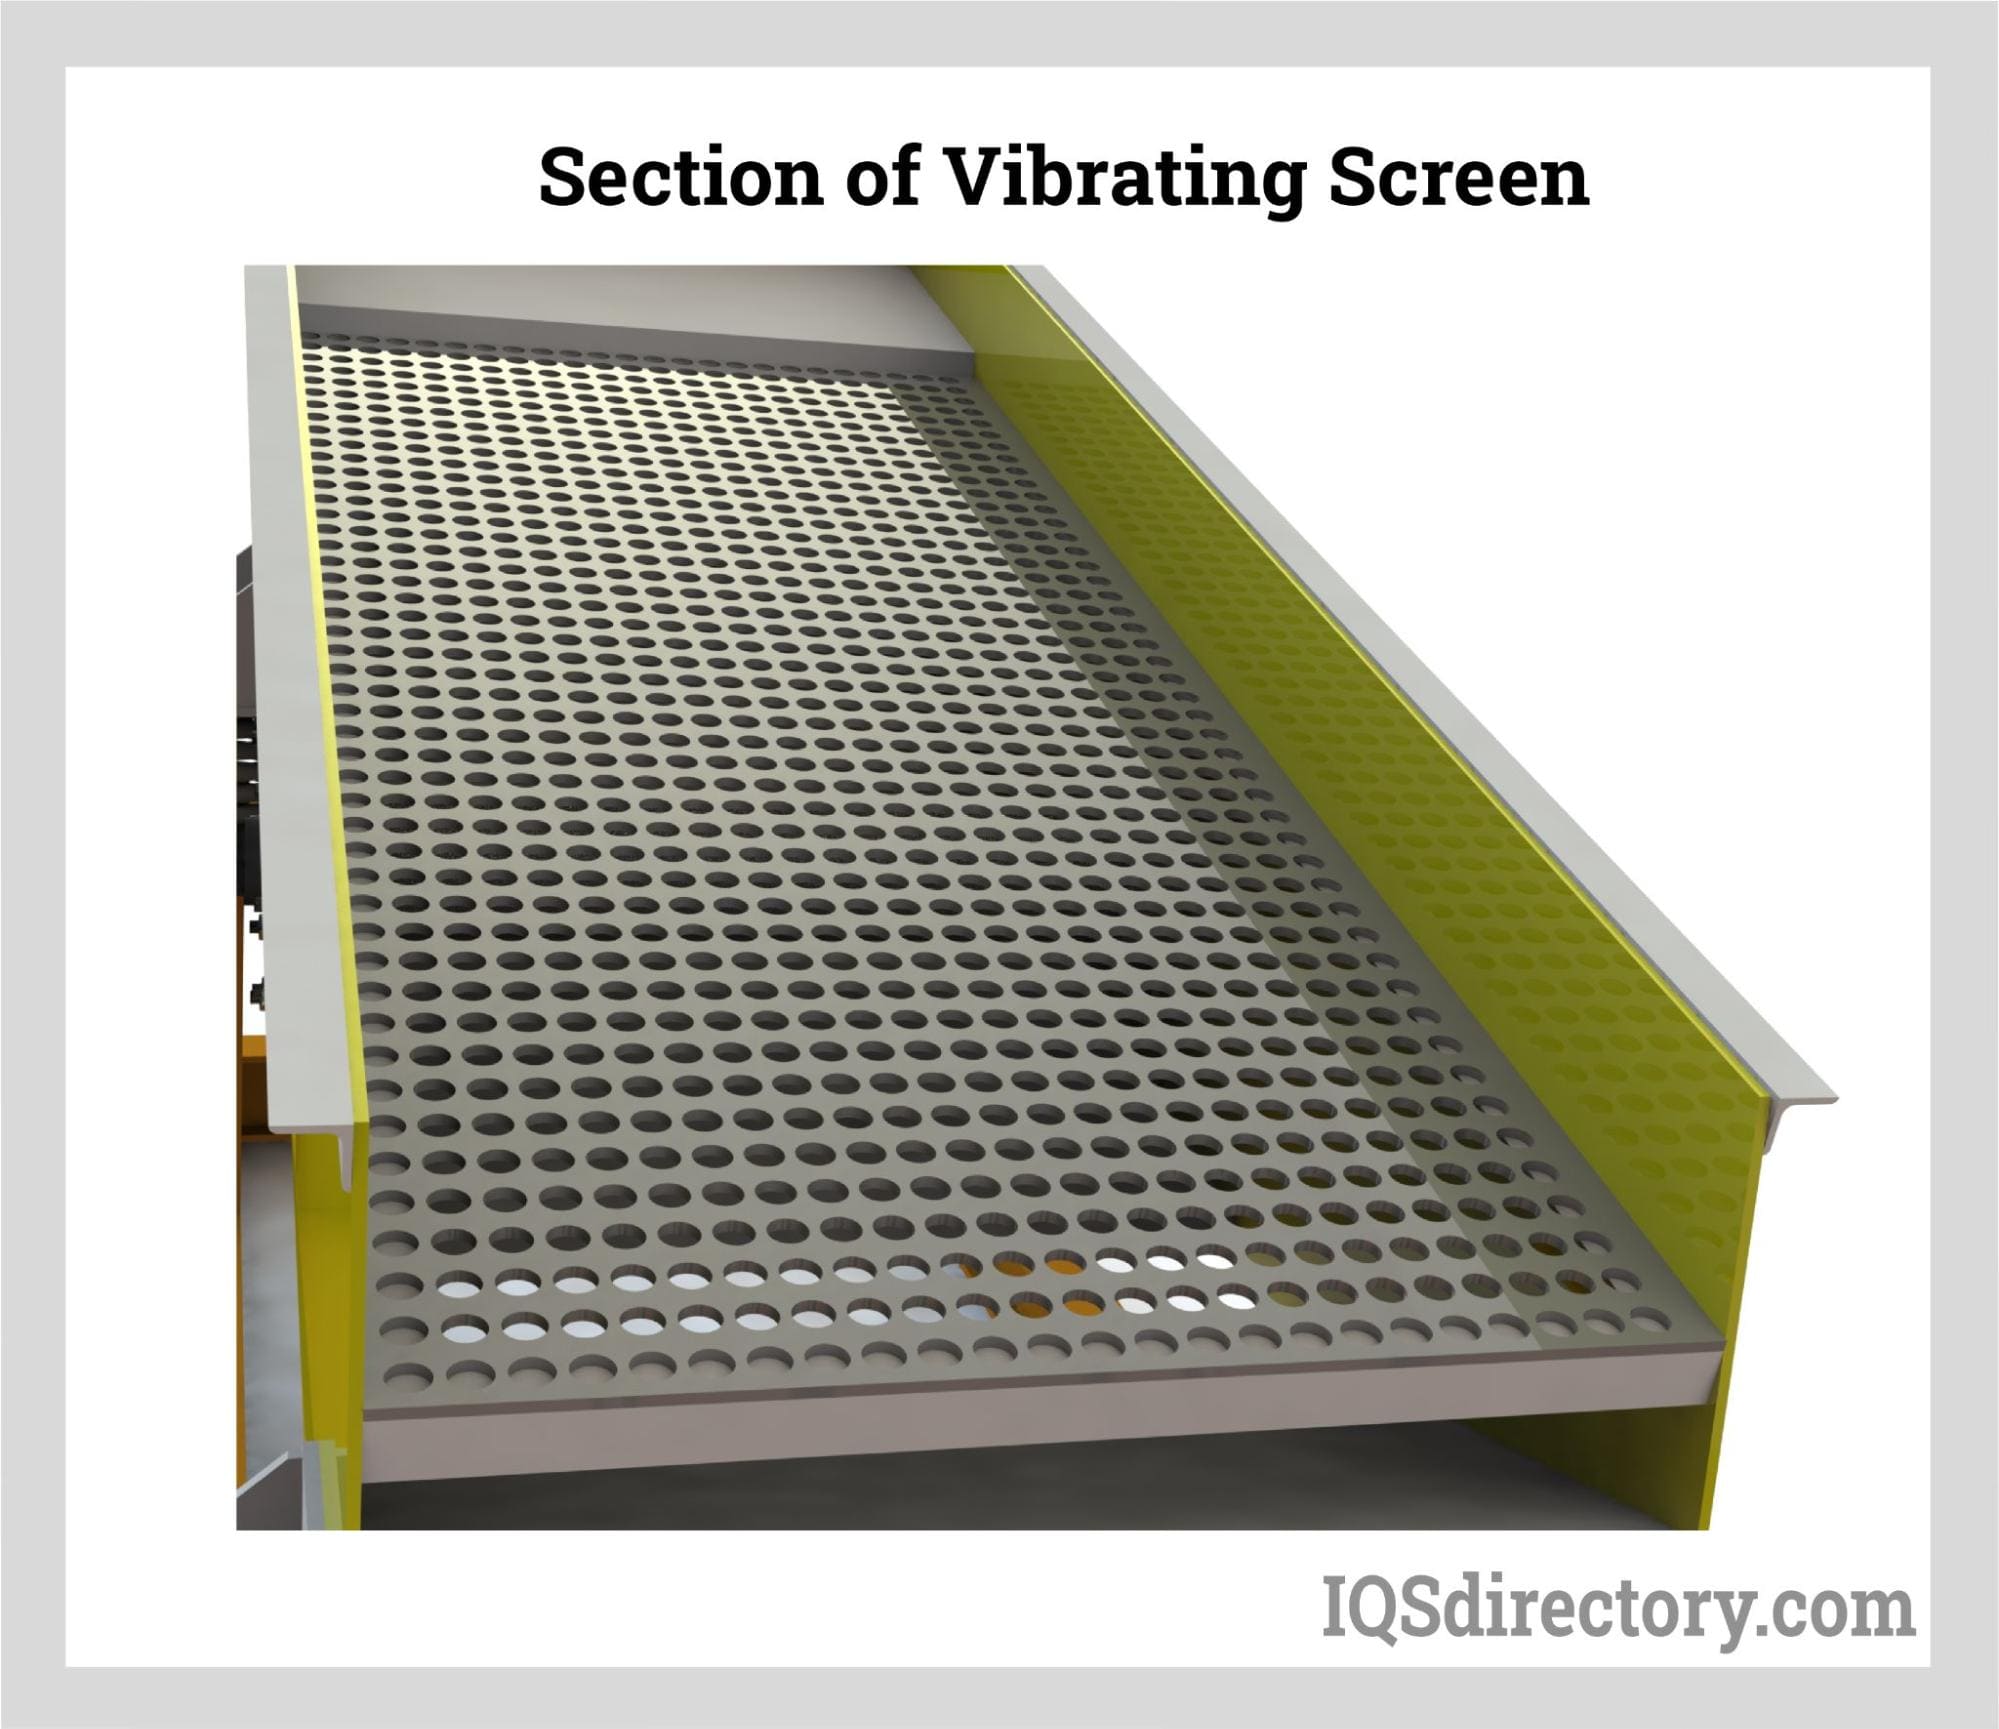 Section of Vibrating Screen